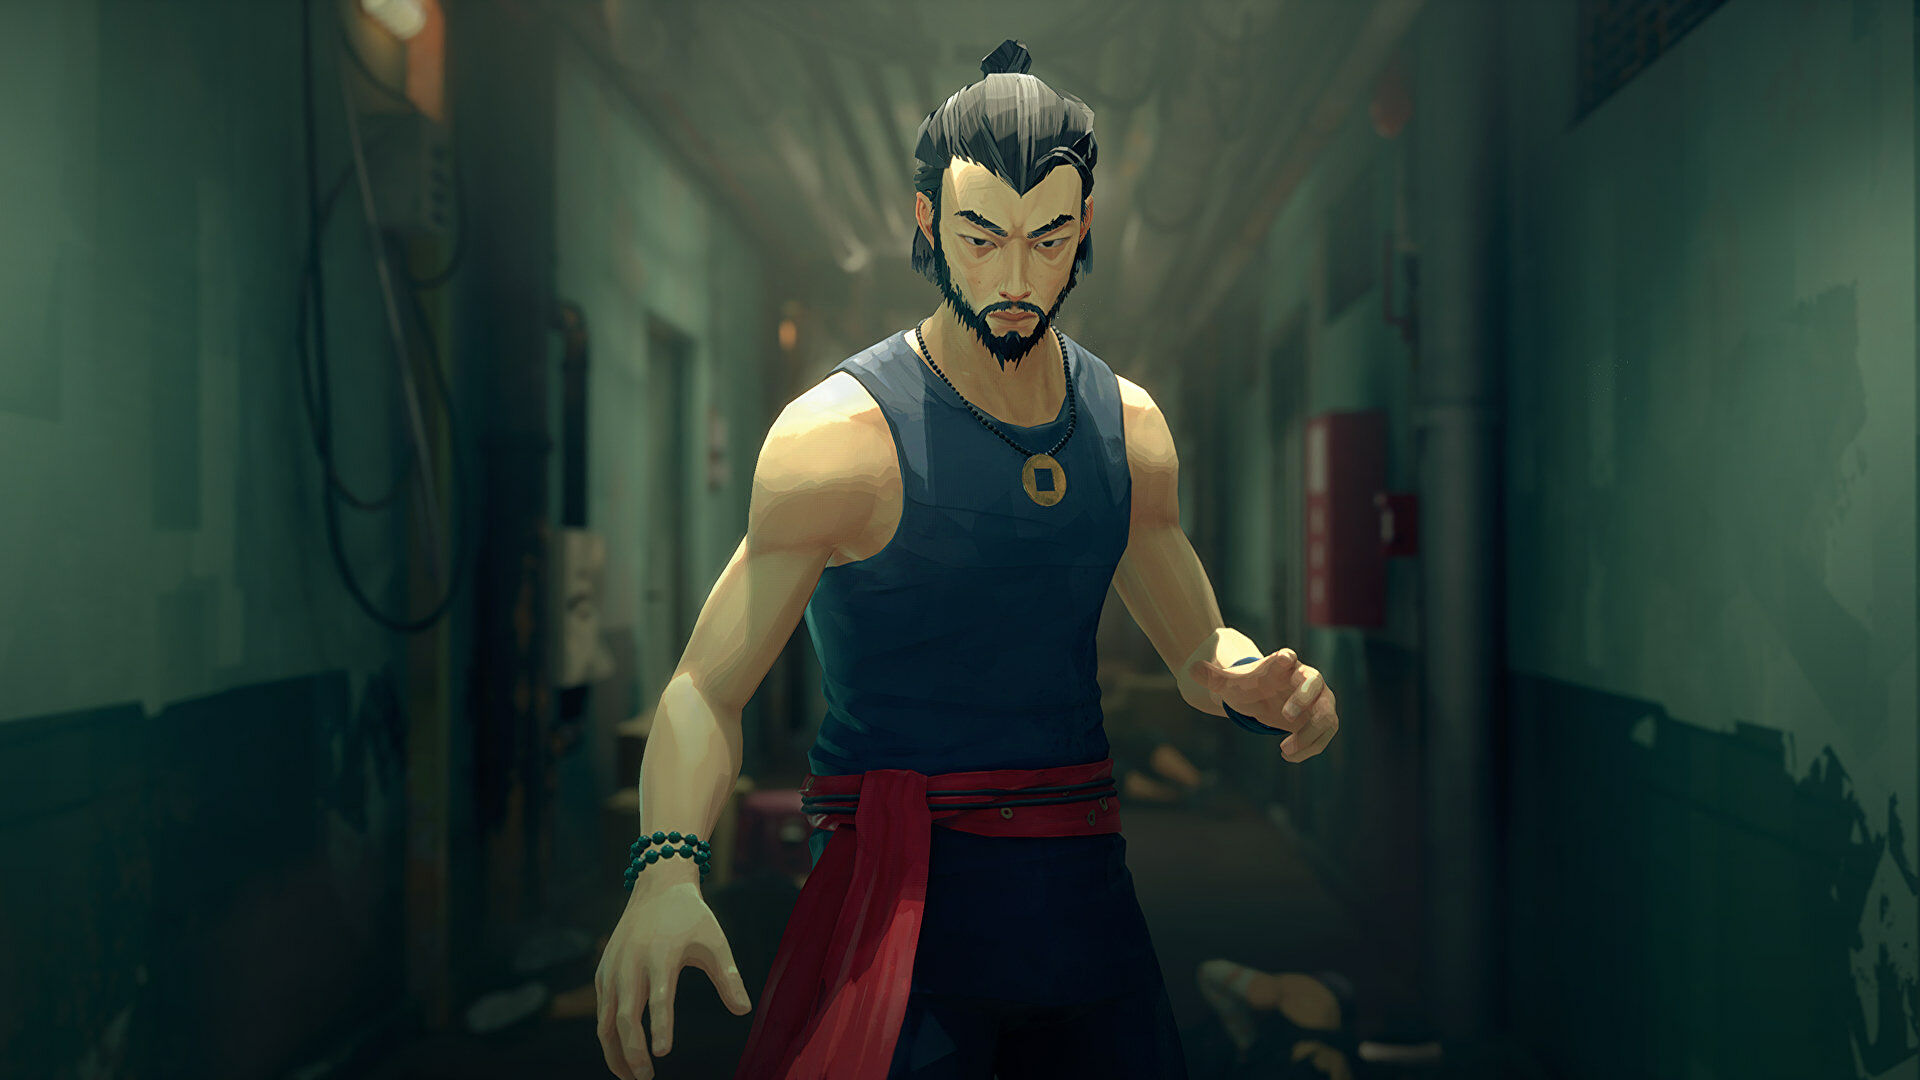 kickpunching-brawler-sifu-is-coming-to-steam-in-march